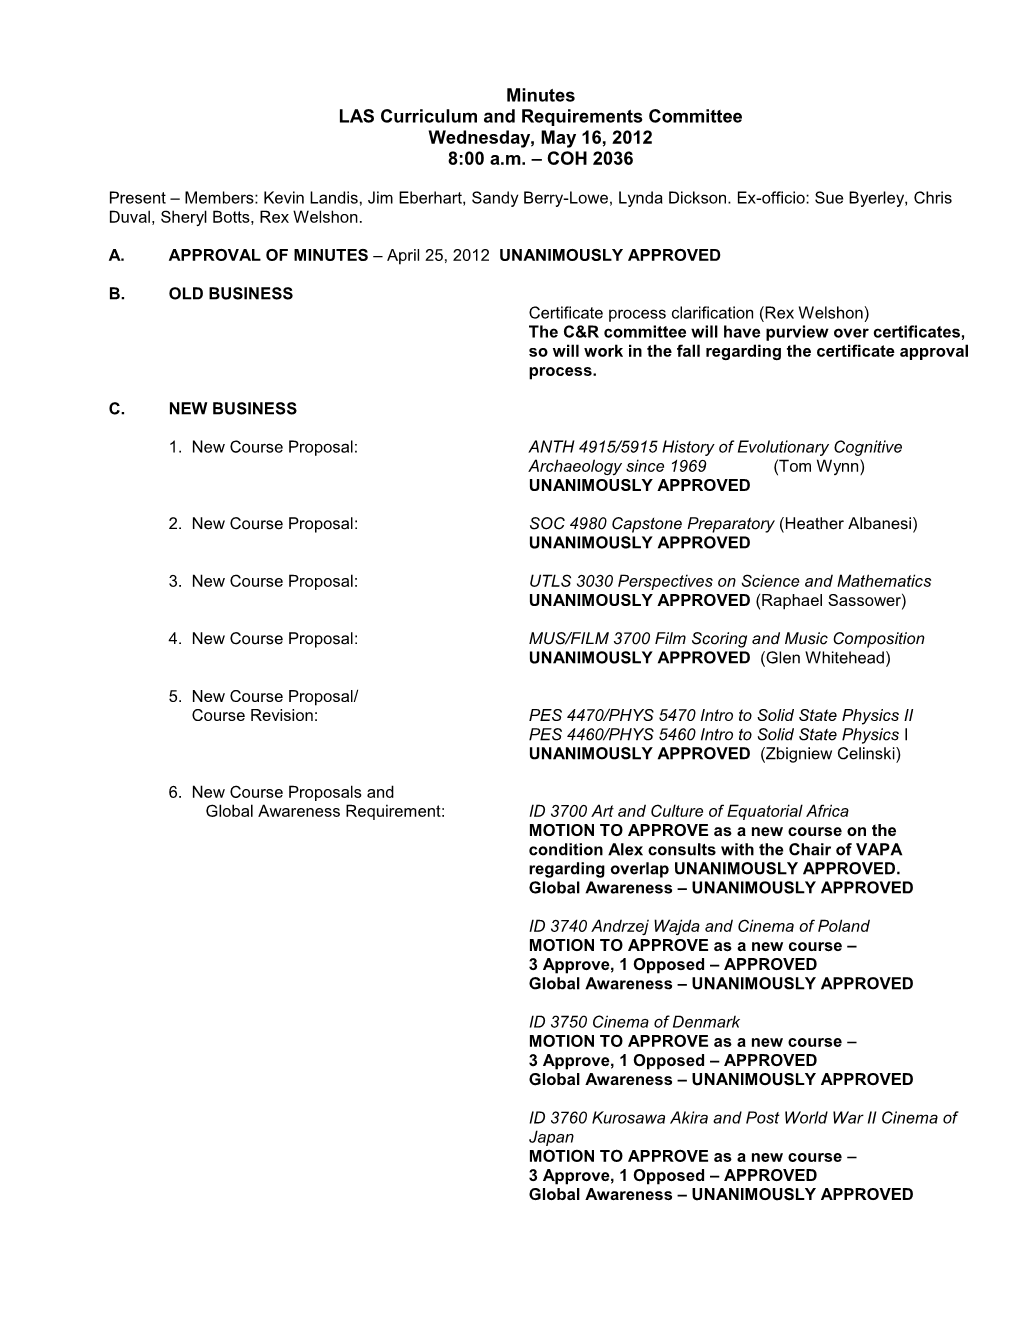 Minutes LAS Curriculum and Requirements Committee Wednesday, May 16, 2012 8:00 A.M. – COH 2036